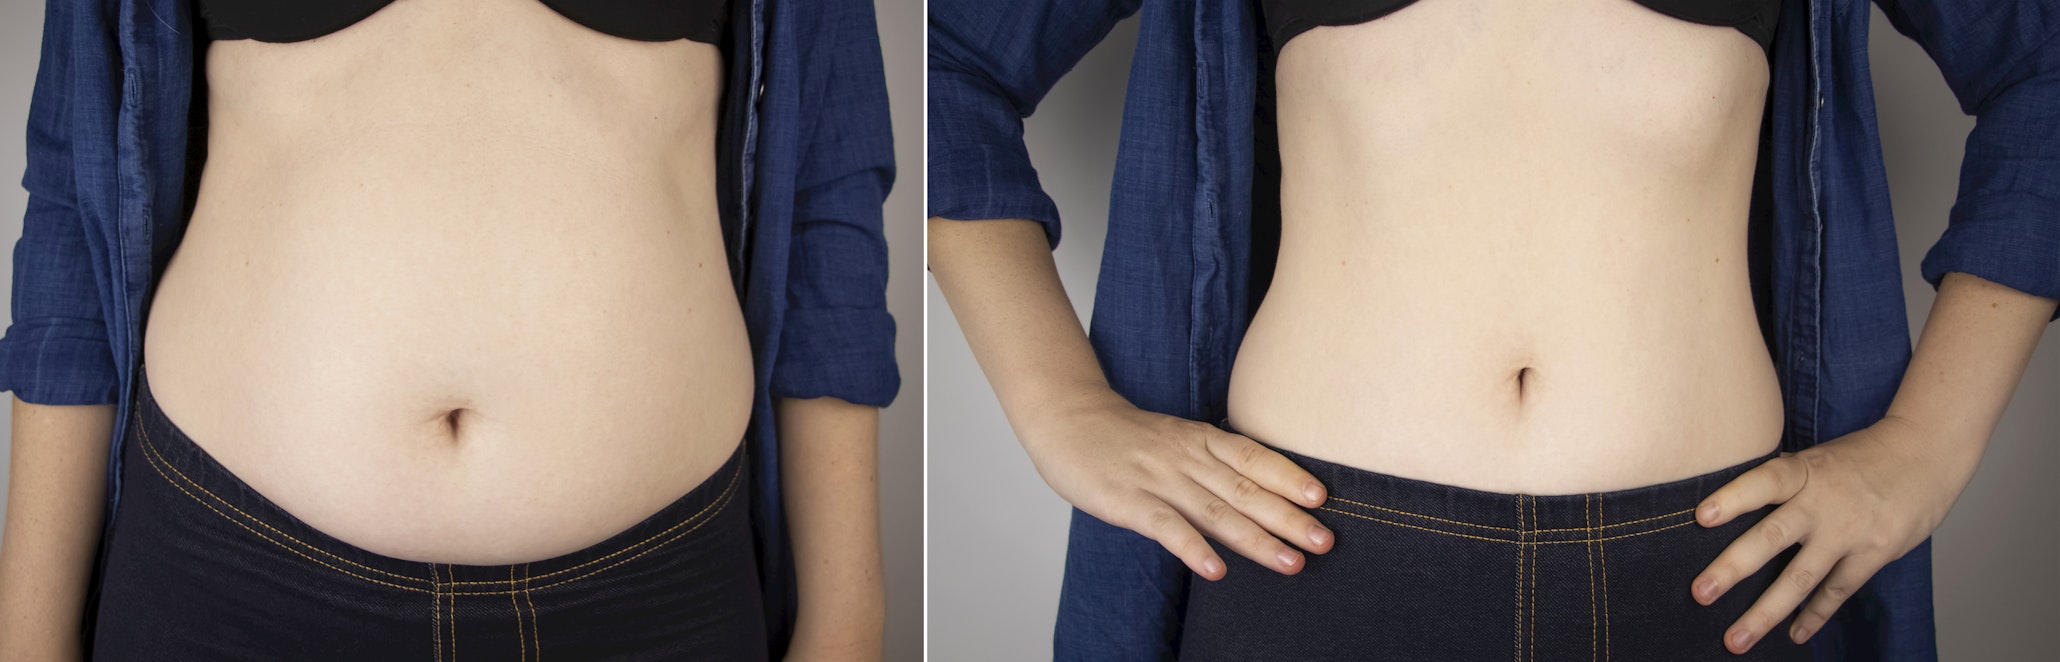 Stomach before and after losing fat